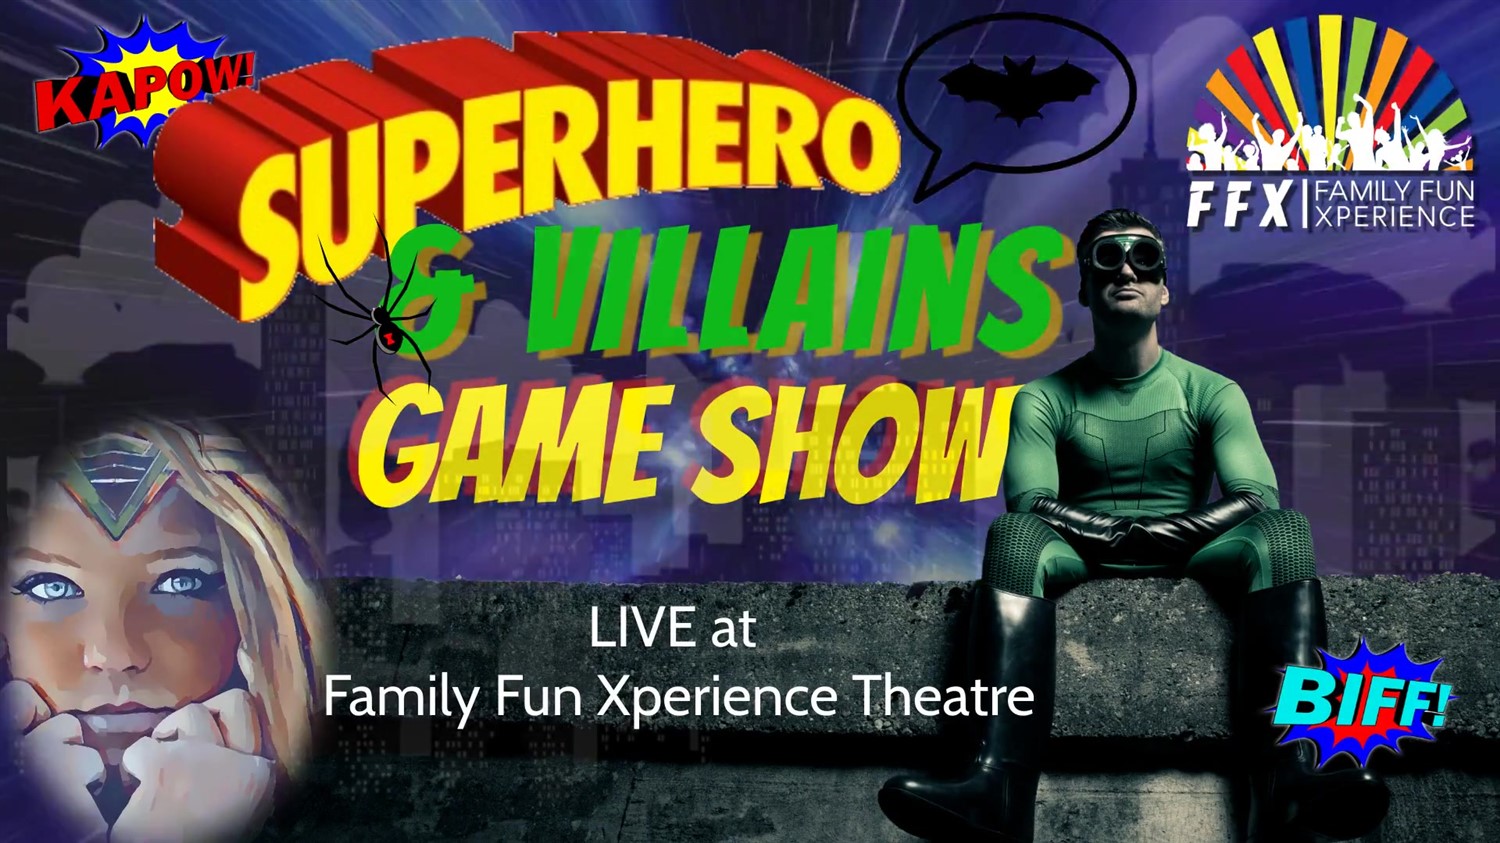 Superheroes & Villains Live Game Show Super fun for everyone! on feb. 19, 19:00@FFX Theatre - Buy tickets and Get information on Family Fun Xperience tickets.ffxshow.org